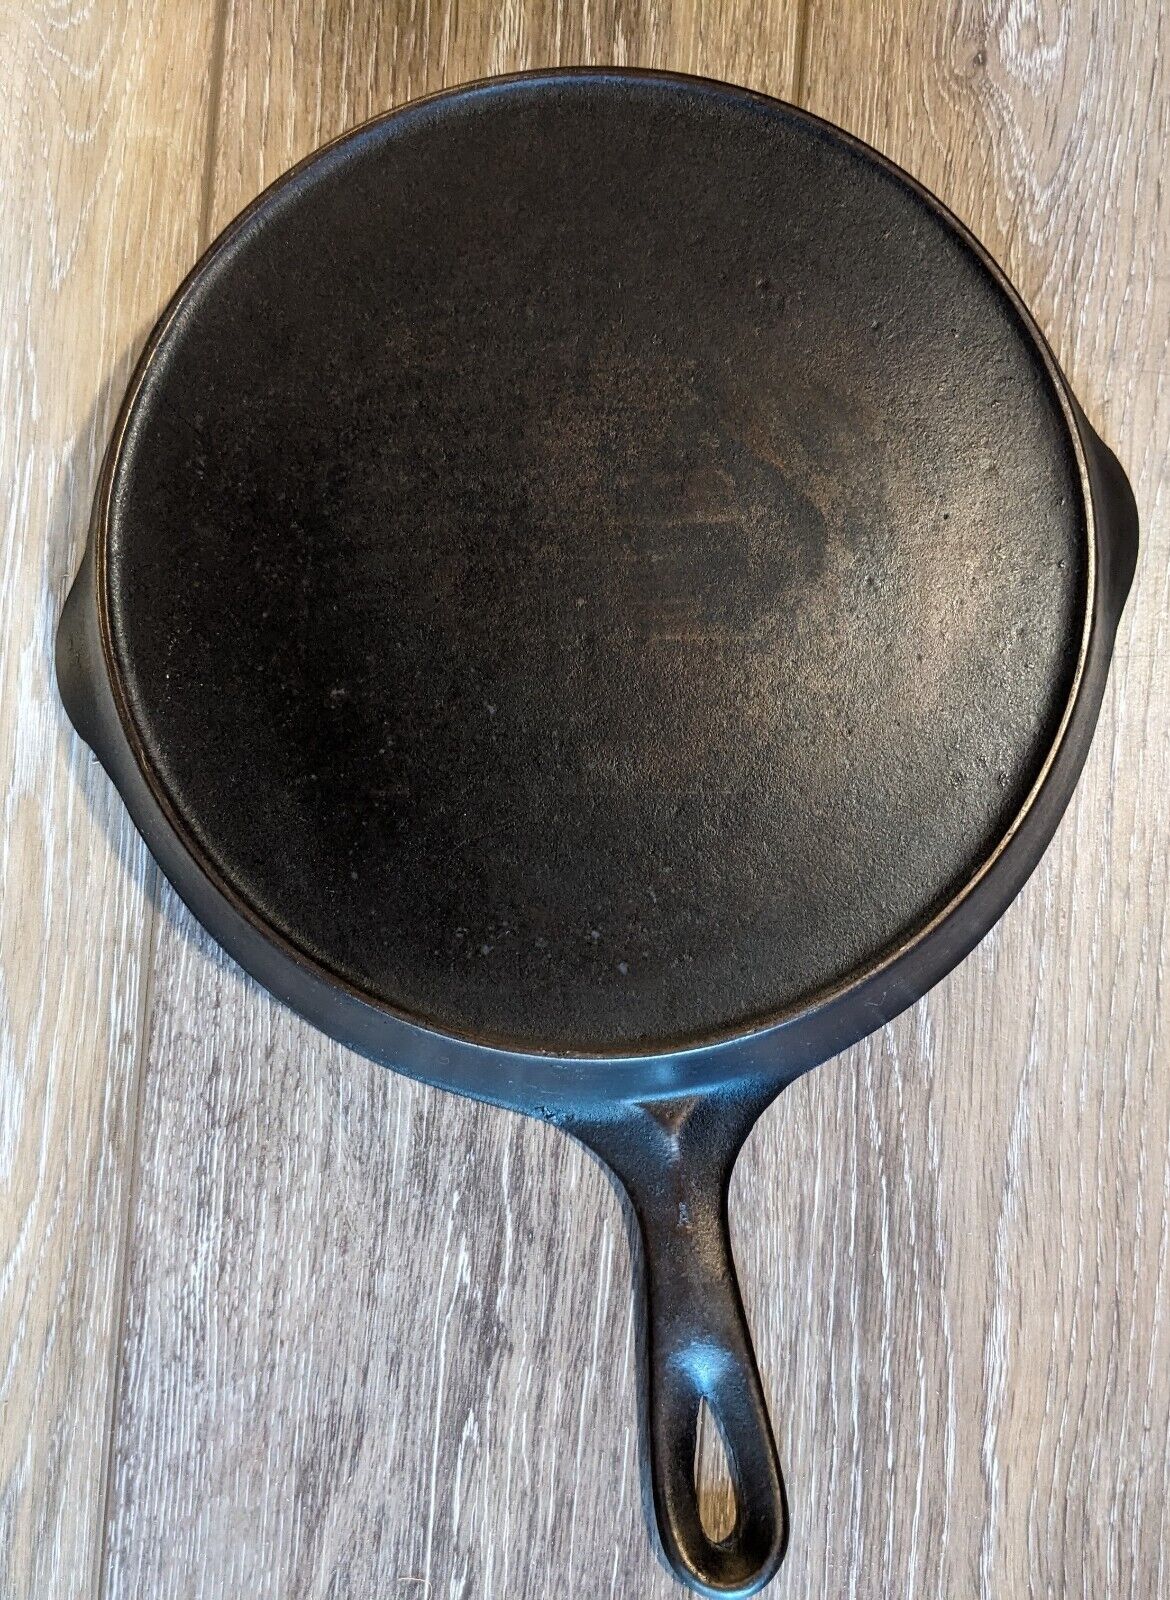 Early Unmarked Wagner #8 Cast Iron Skillet - Fully Restored - NICE